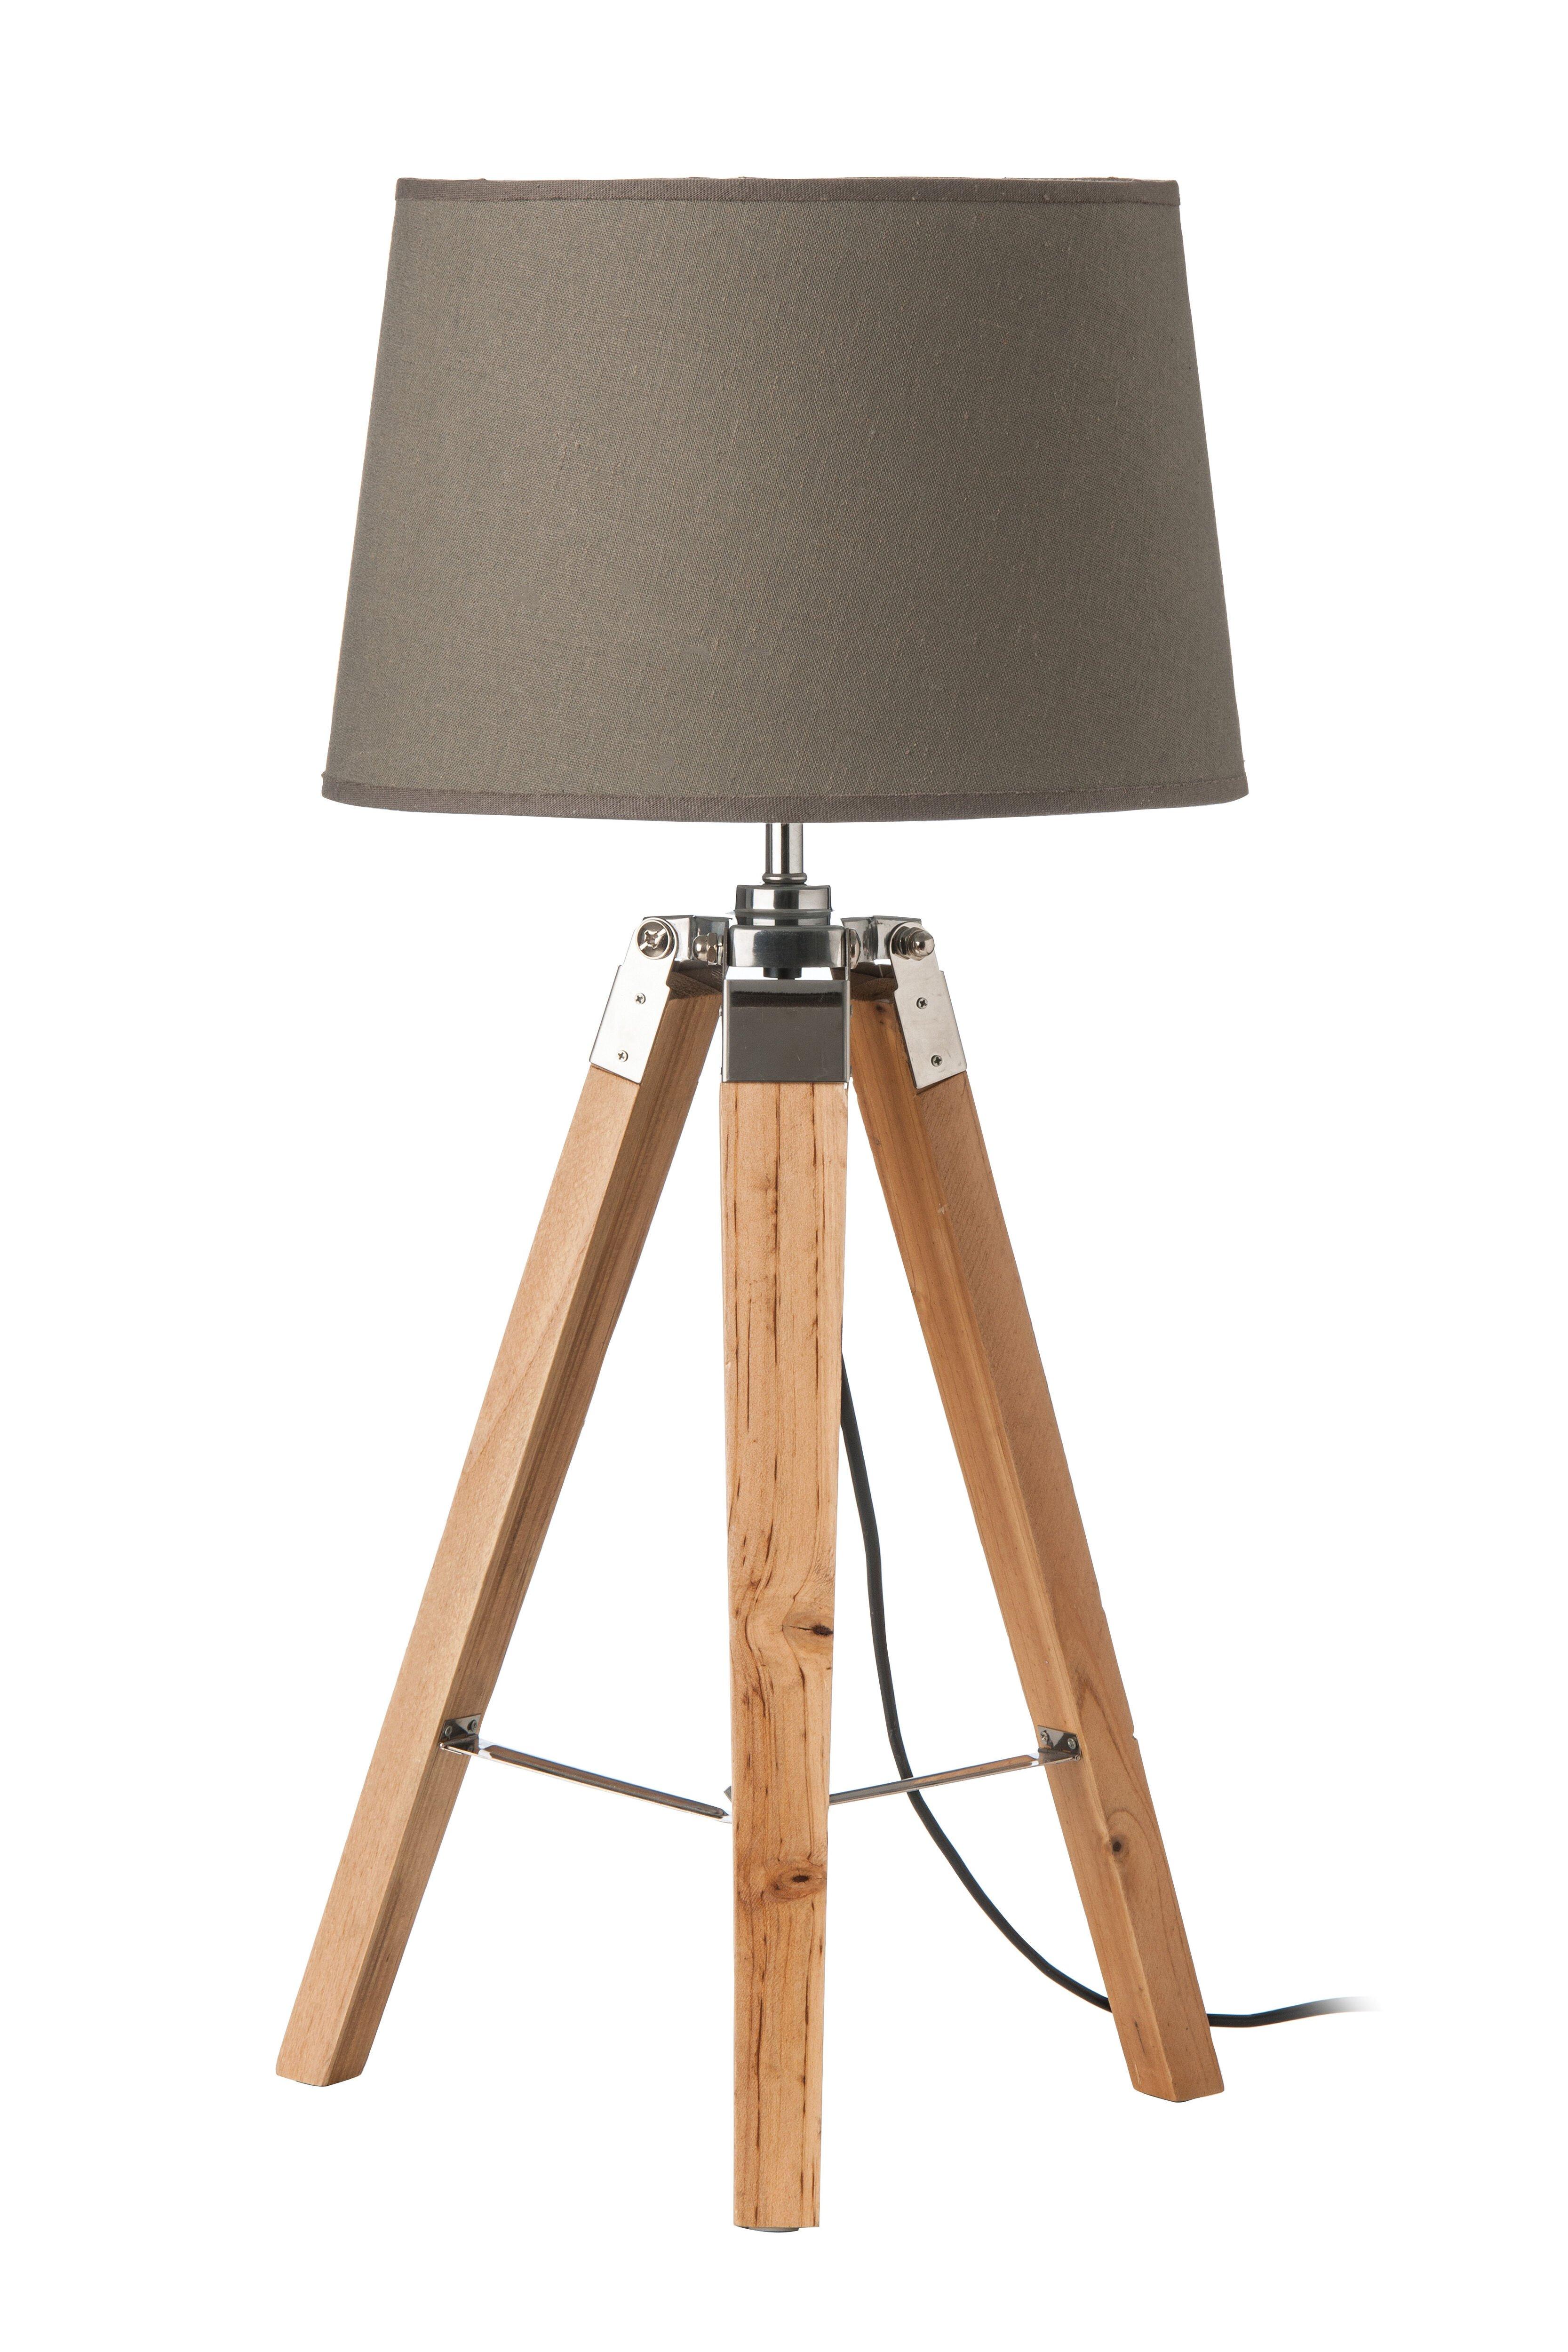 Interiors by Premier Tripod Table Lamp with Light Wood Base